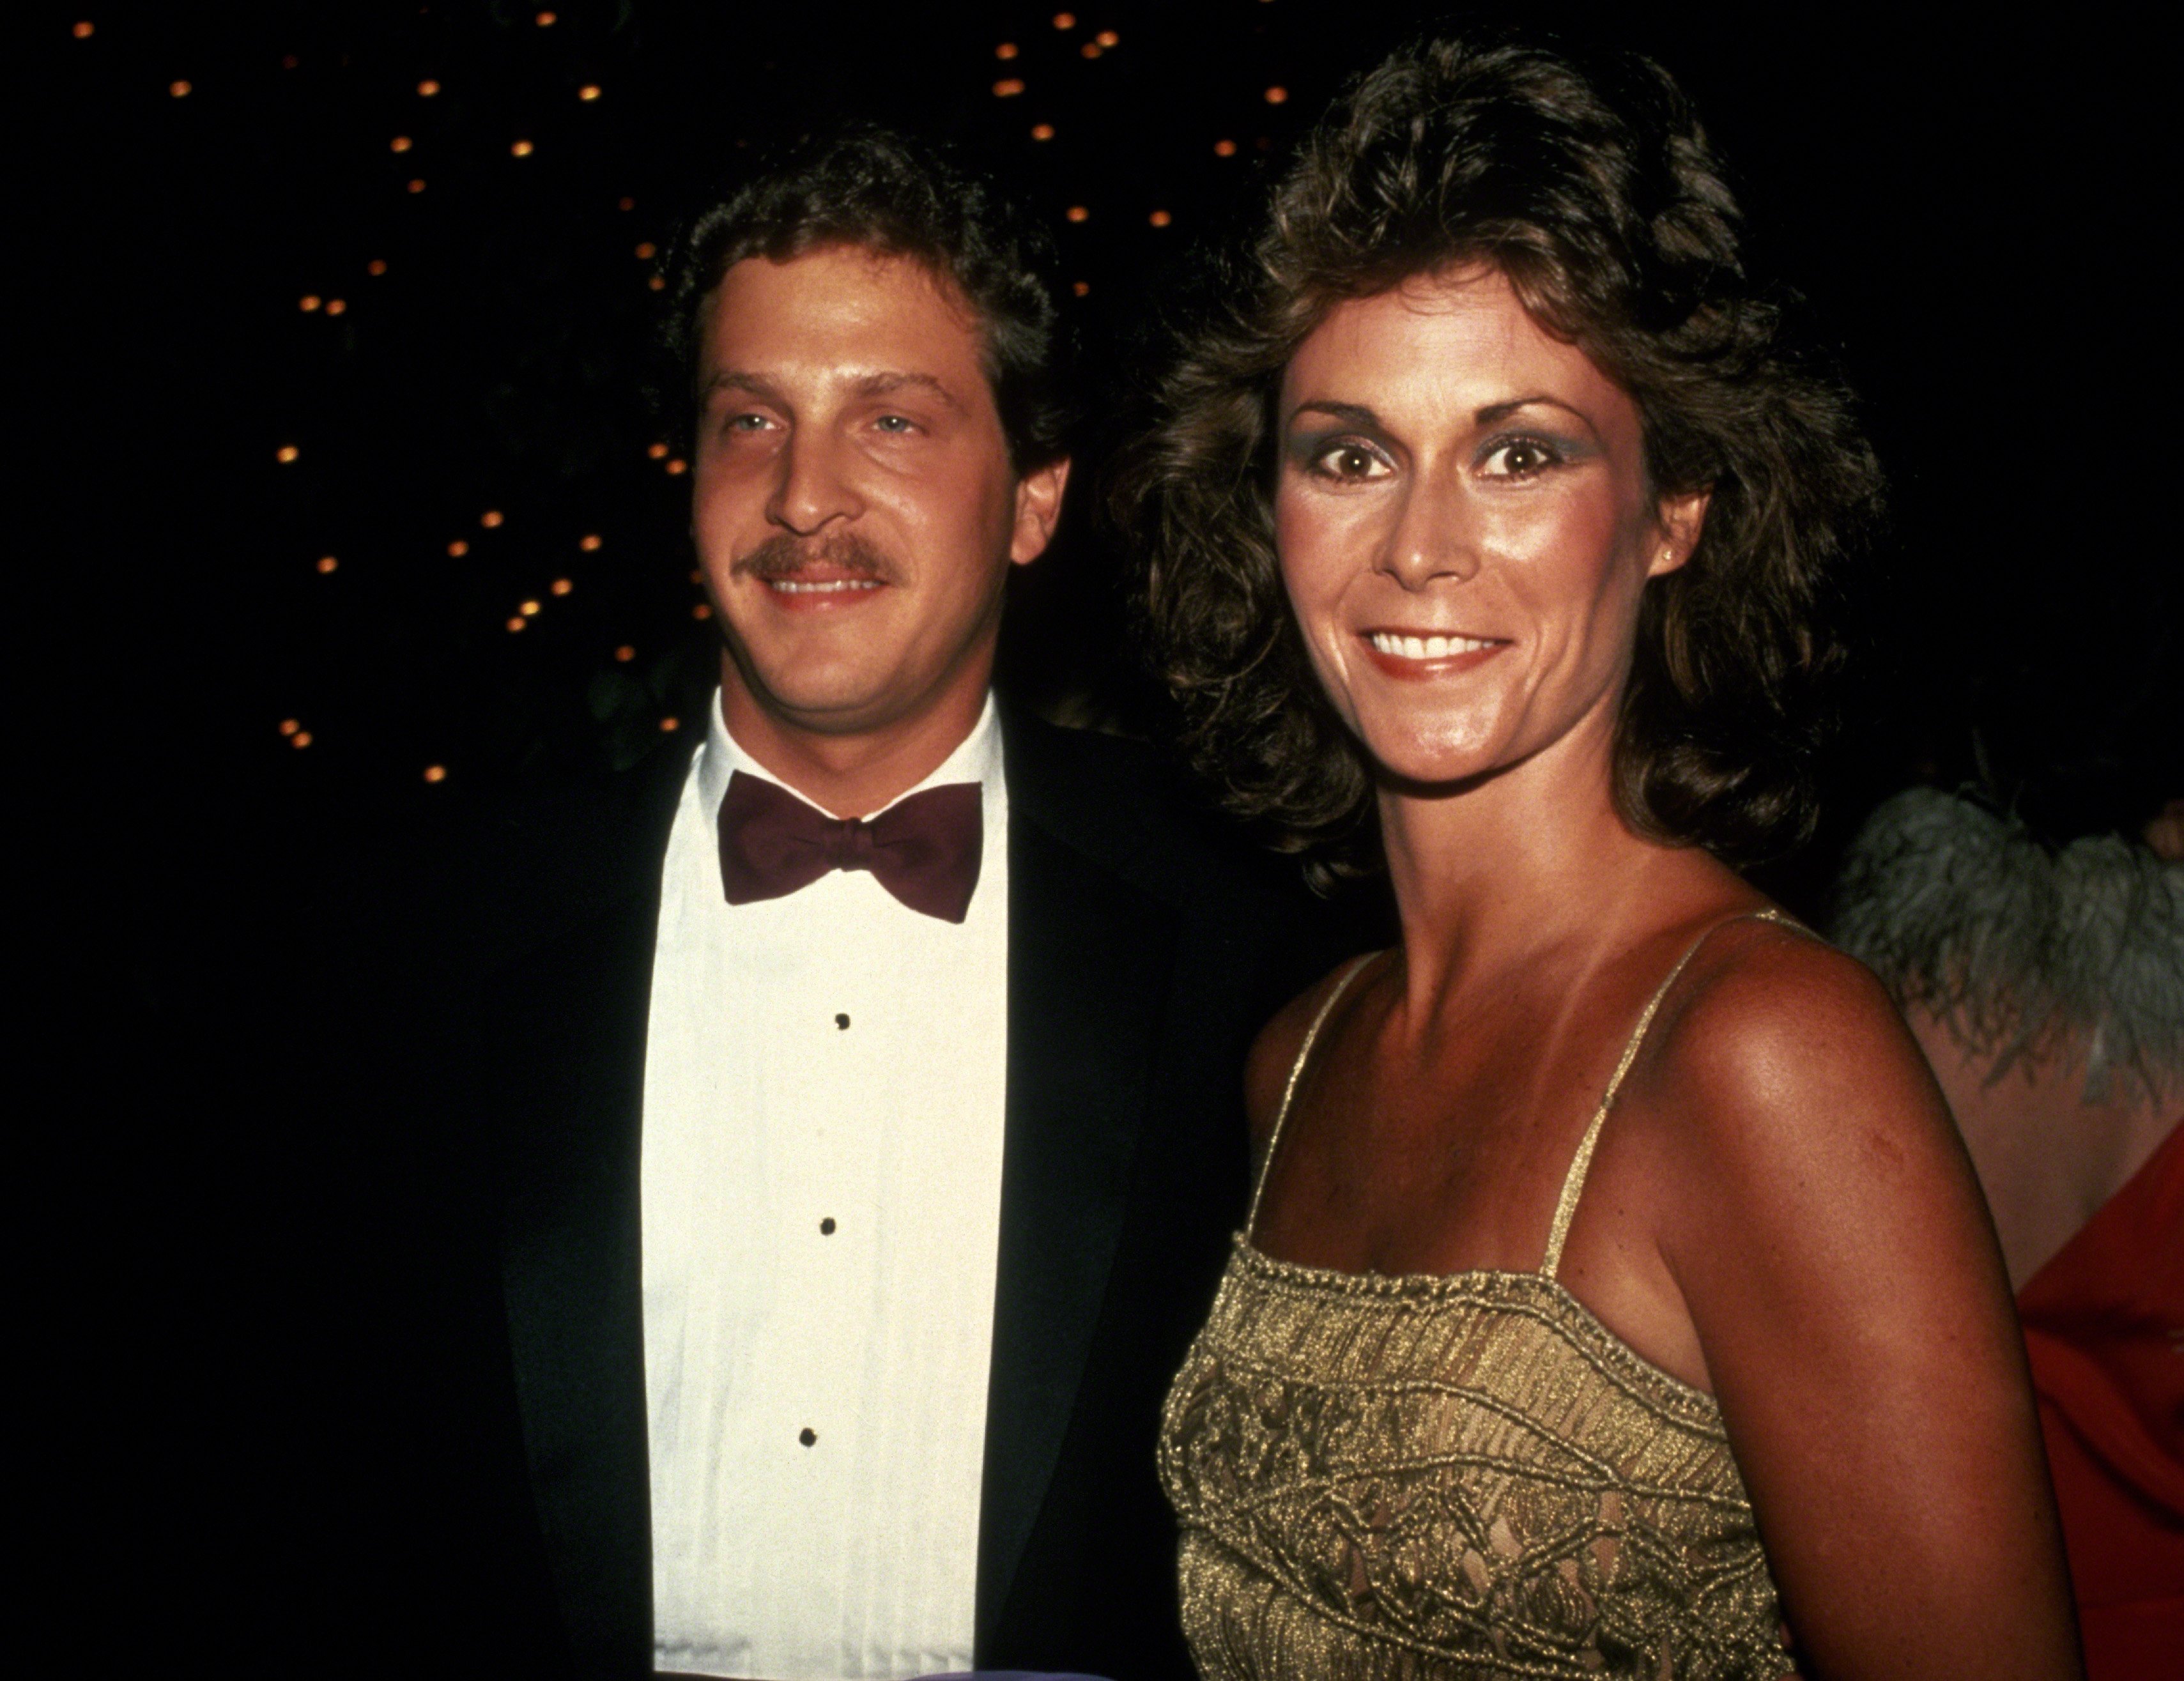 Kate Jackson and David Greenwald seen attending a function together in New York City circa 1983 | Source: Getty Images